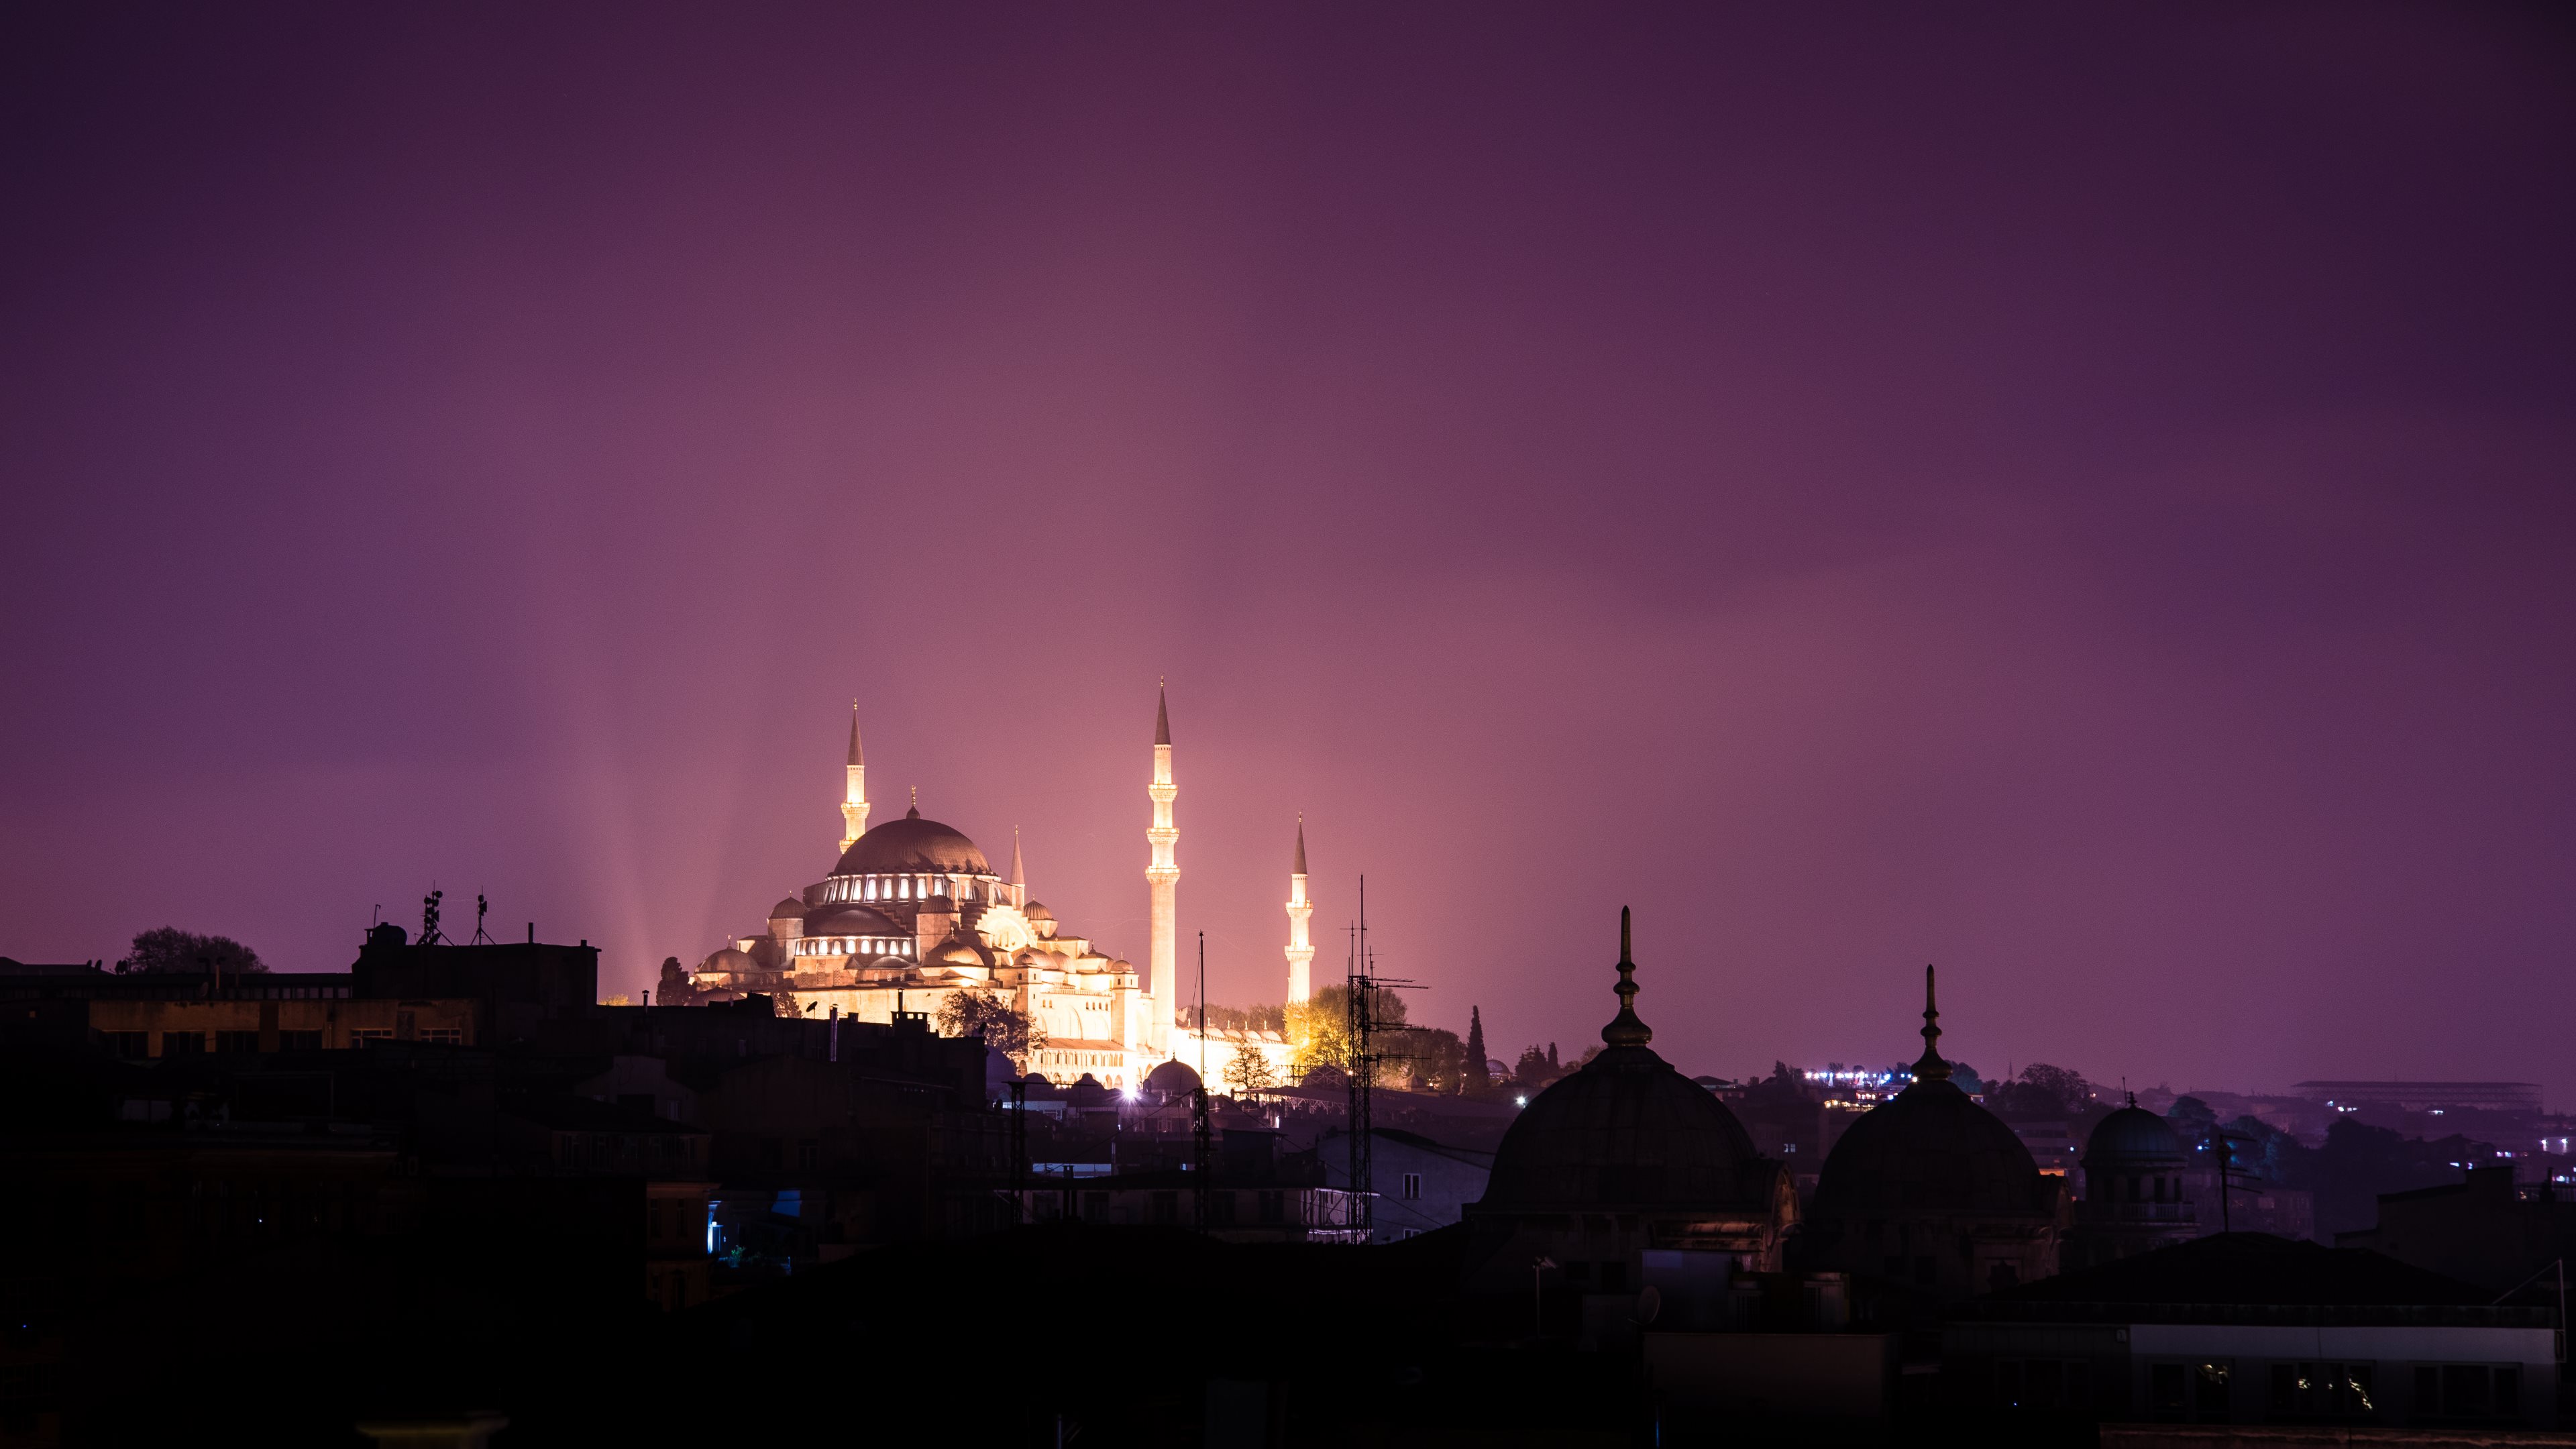 islam, mosque, religious, suleymaniye mosque, night, religion, mosques cell phone wallpapers